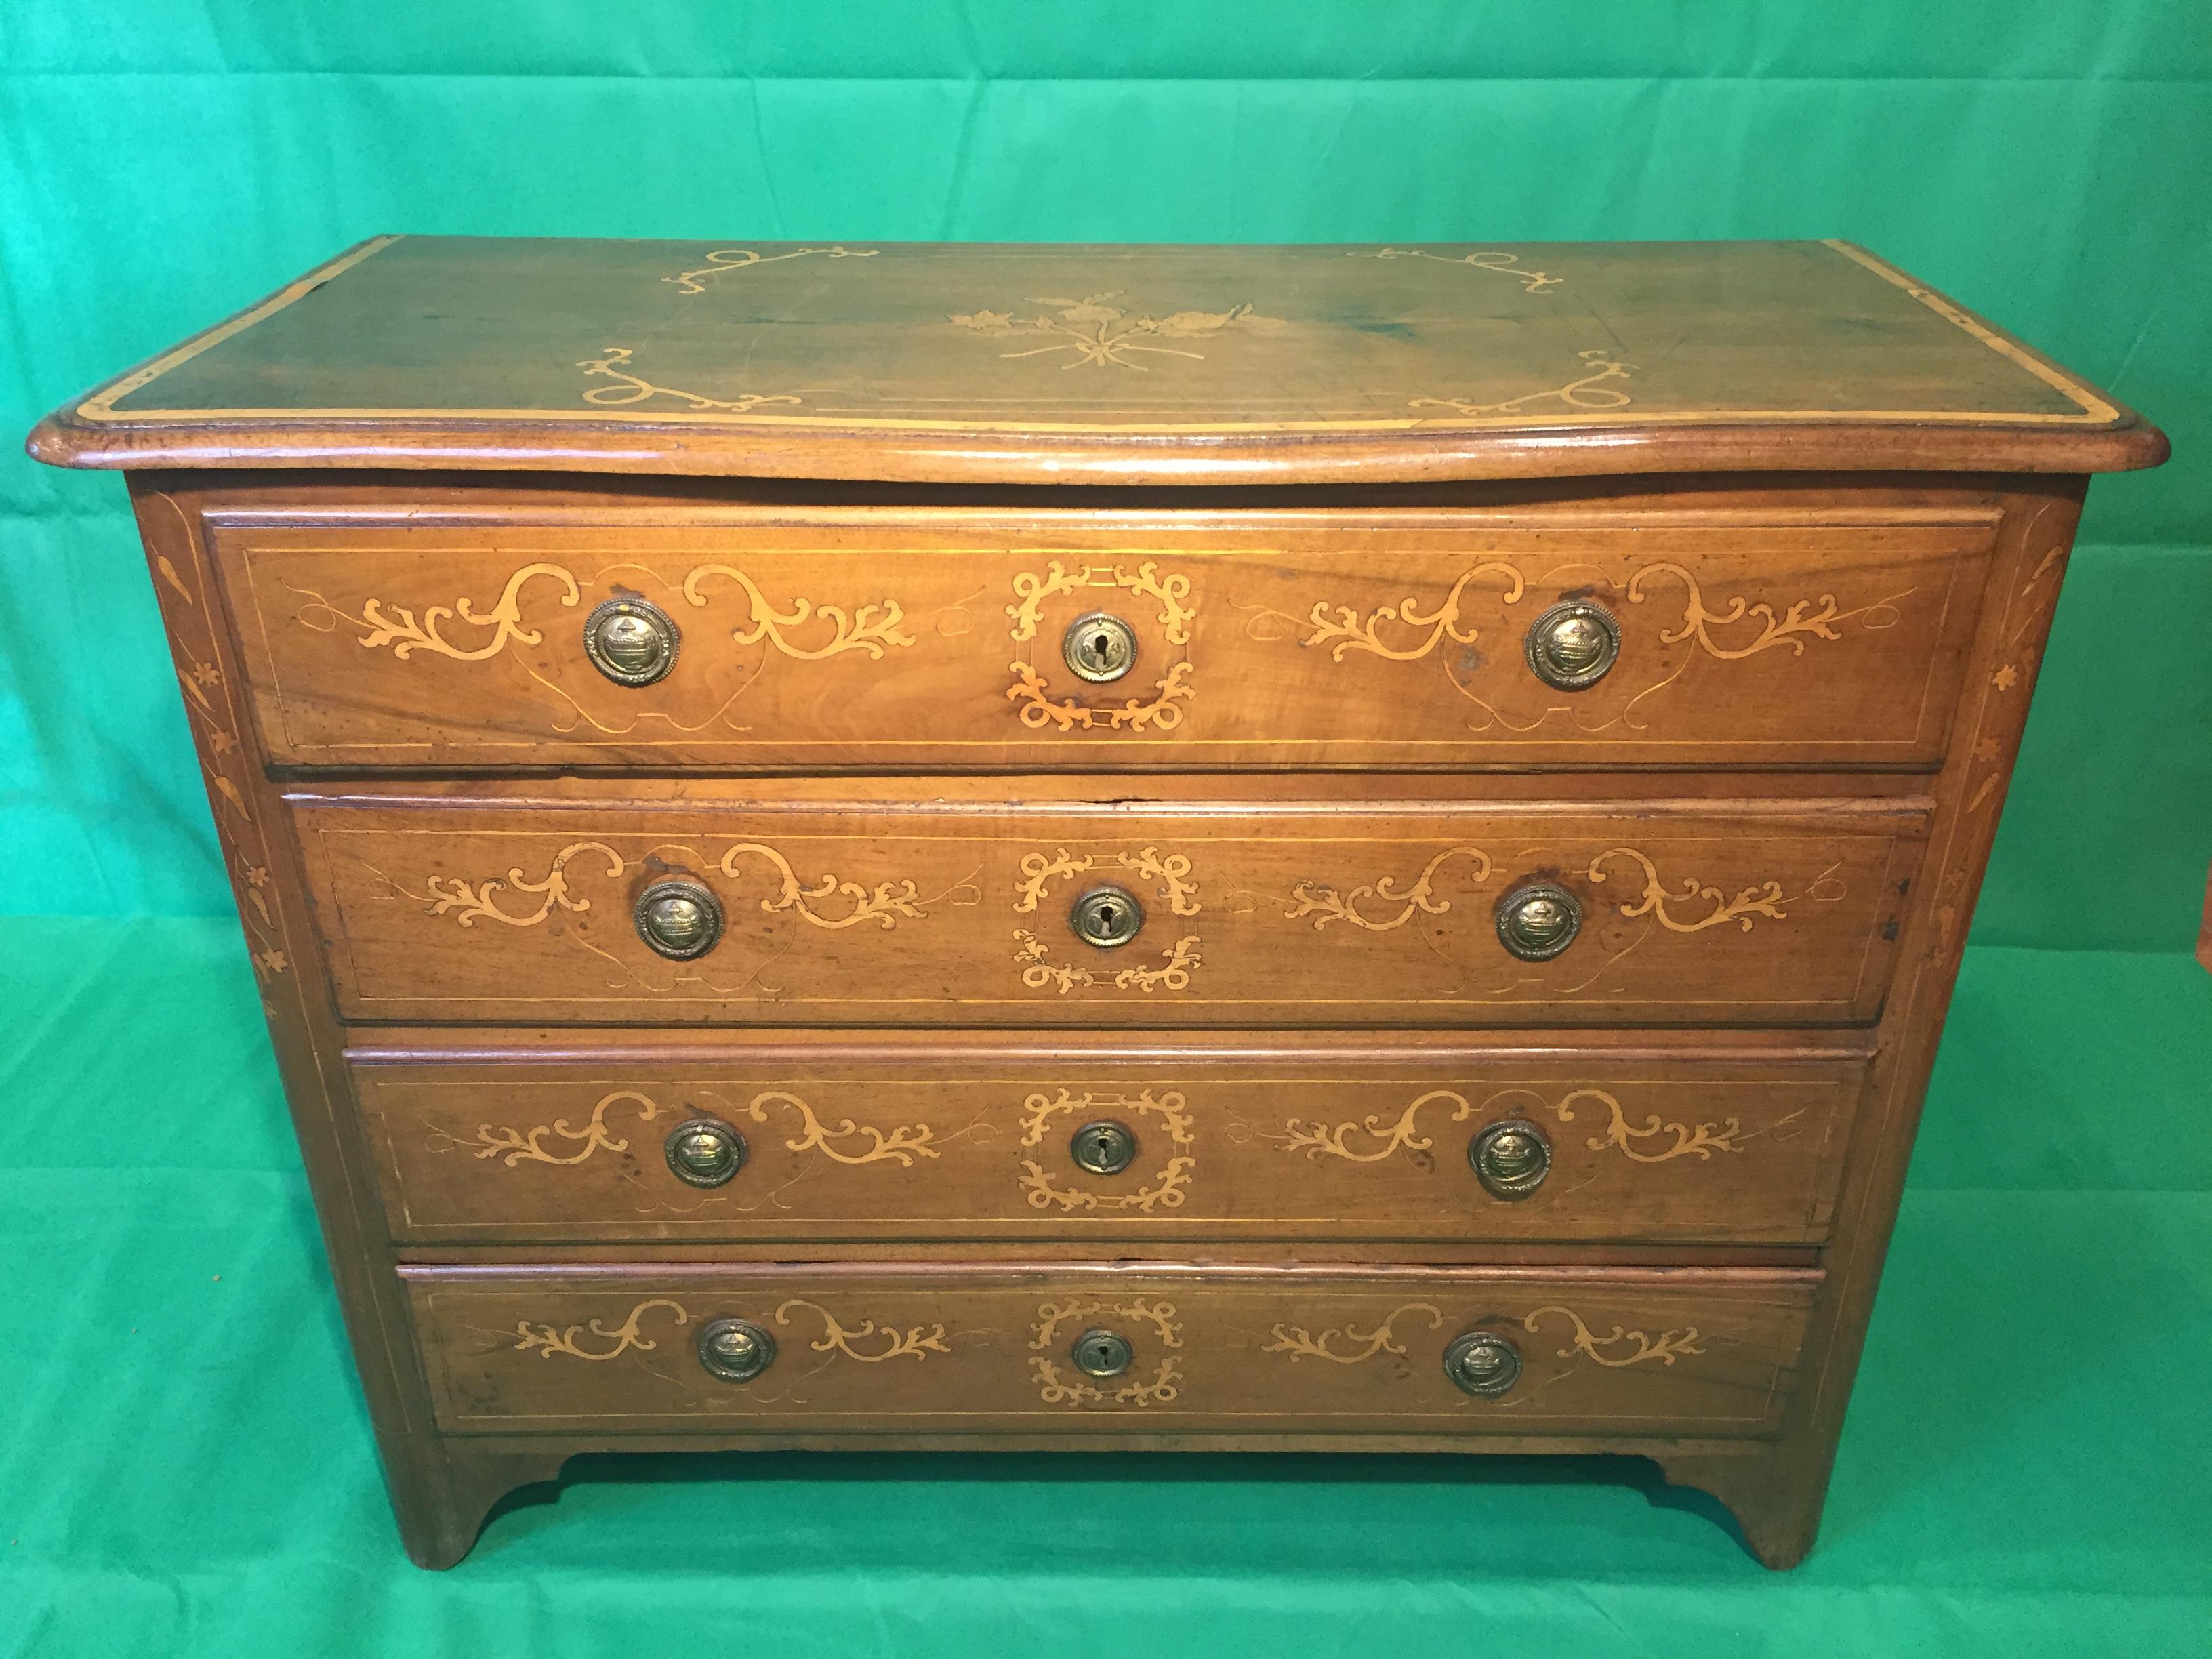 Beautiful Italian chest of drawers, of Piedmontese origin, in walnut wood and inlaid with floral motifs in fruit woods. In patina and in excellent condition, completely original except for a small part of the wood of the back, replaced in the late